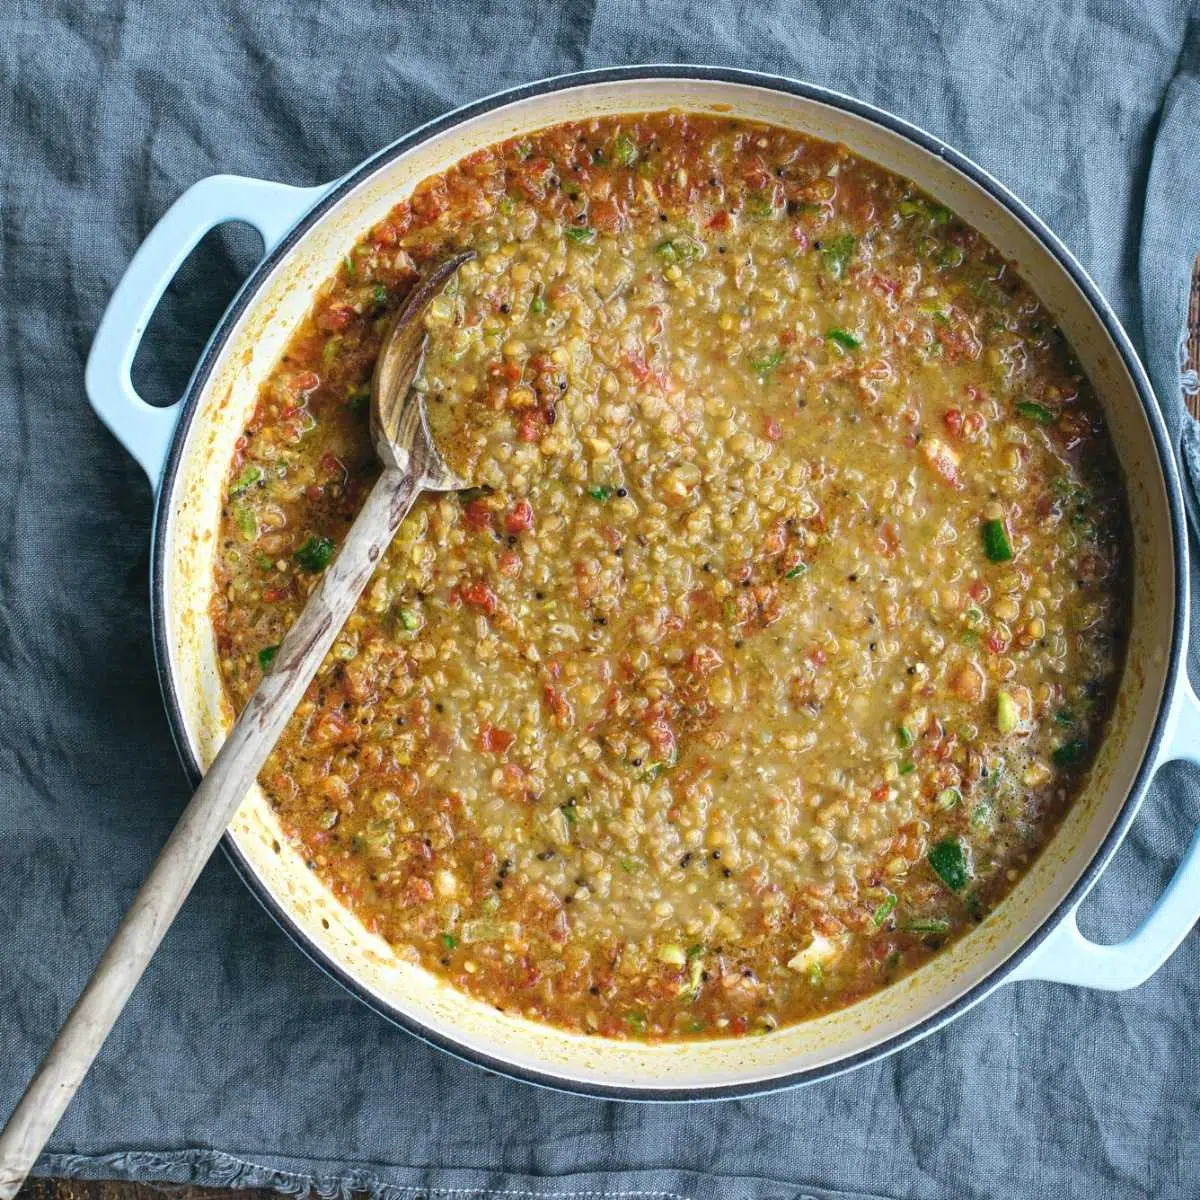 Cooked lentils with tomatoes in a pan.